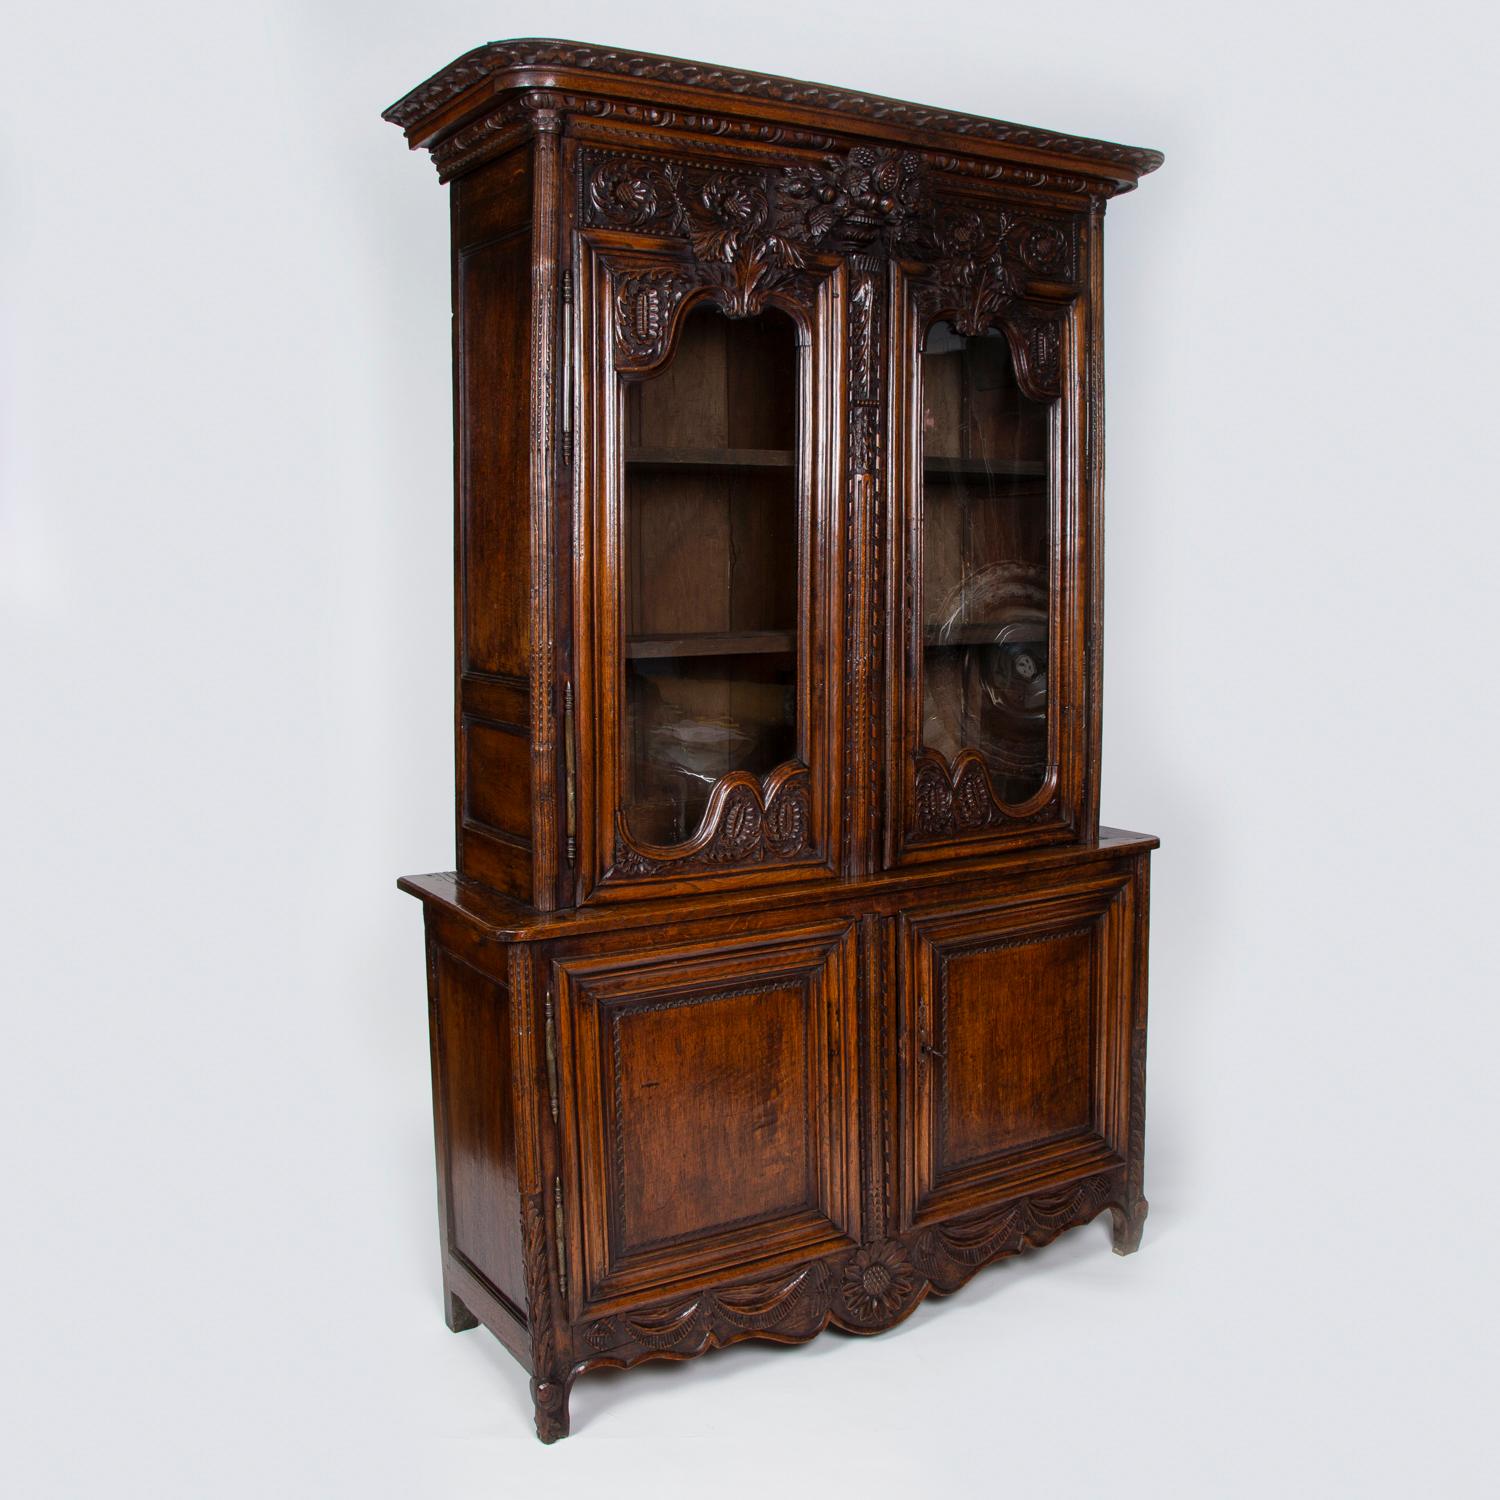 A large French mid-18th century highly carved oak cabinet 